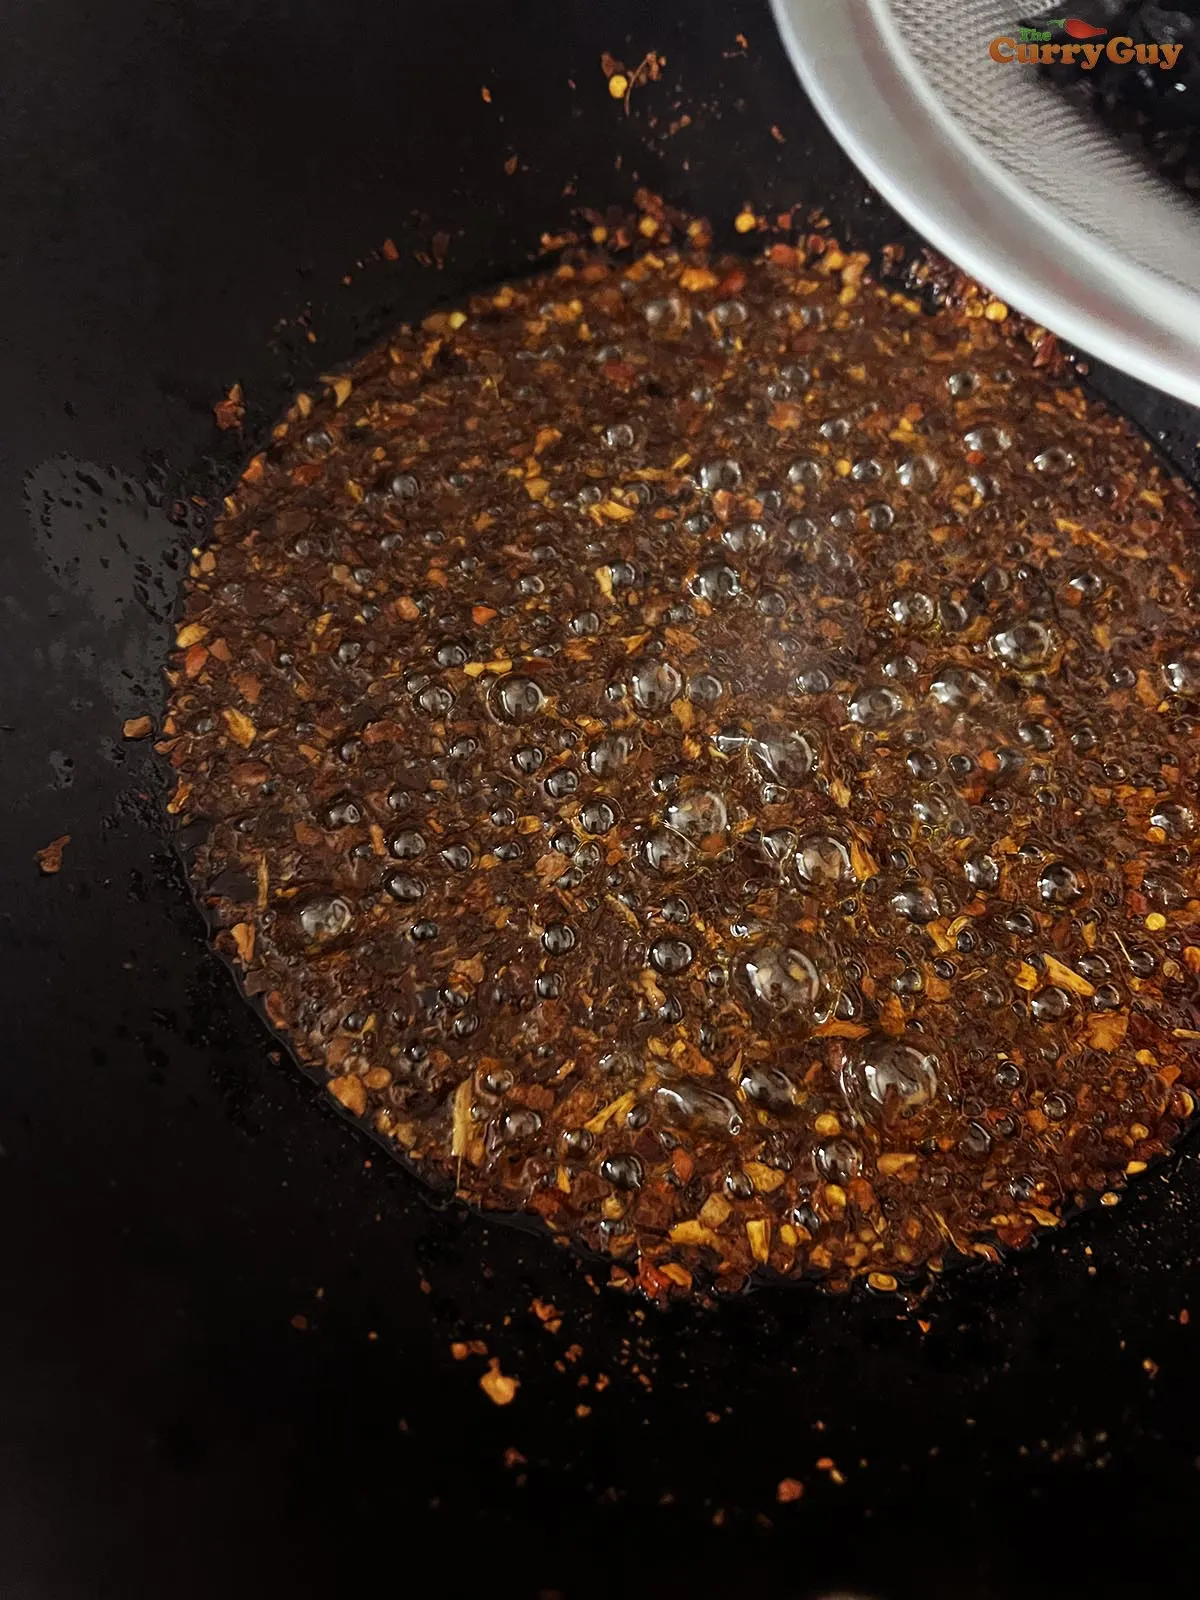 Pouring the spice infused oil through a sieve over the chili flakes.